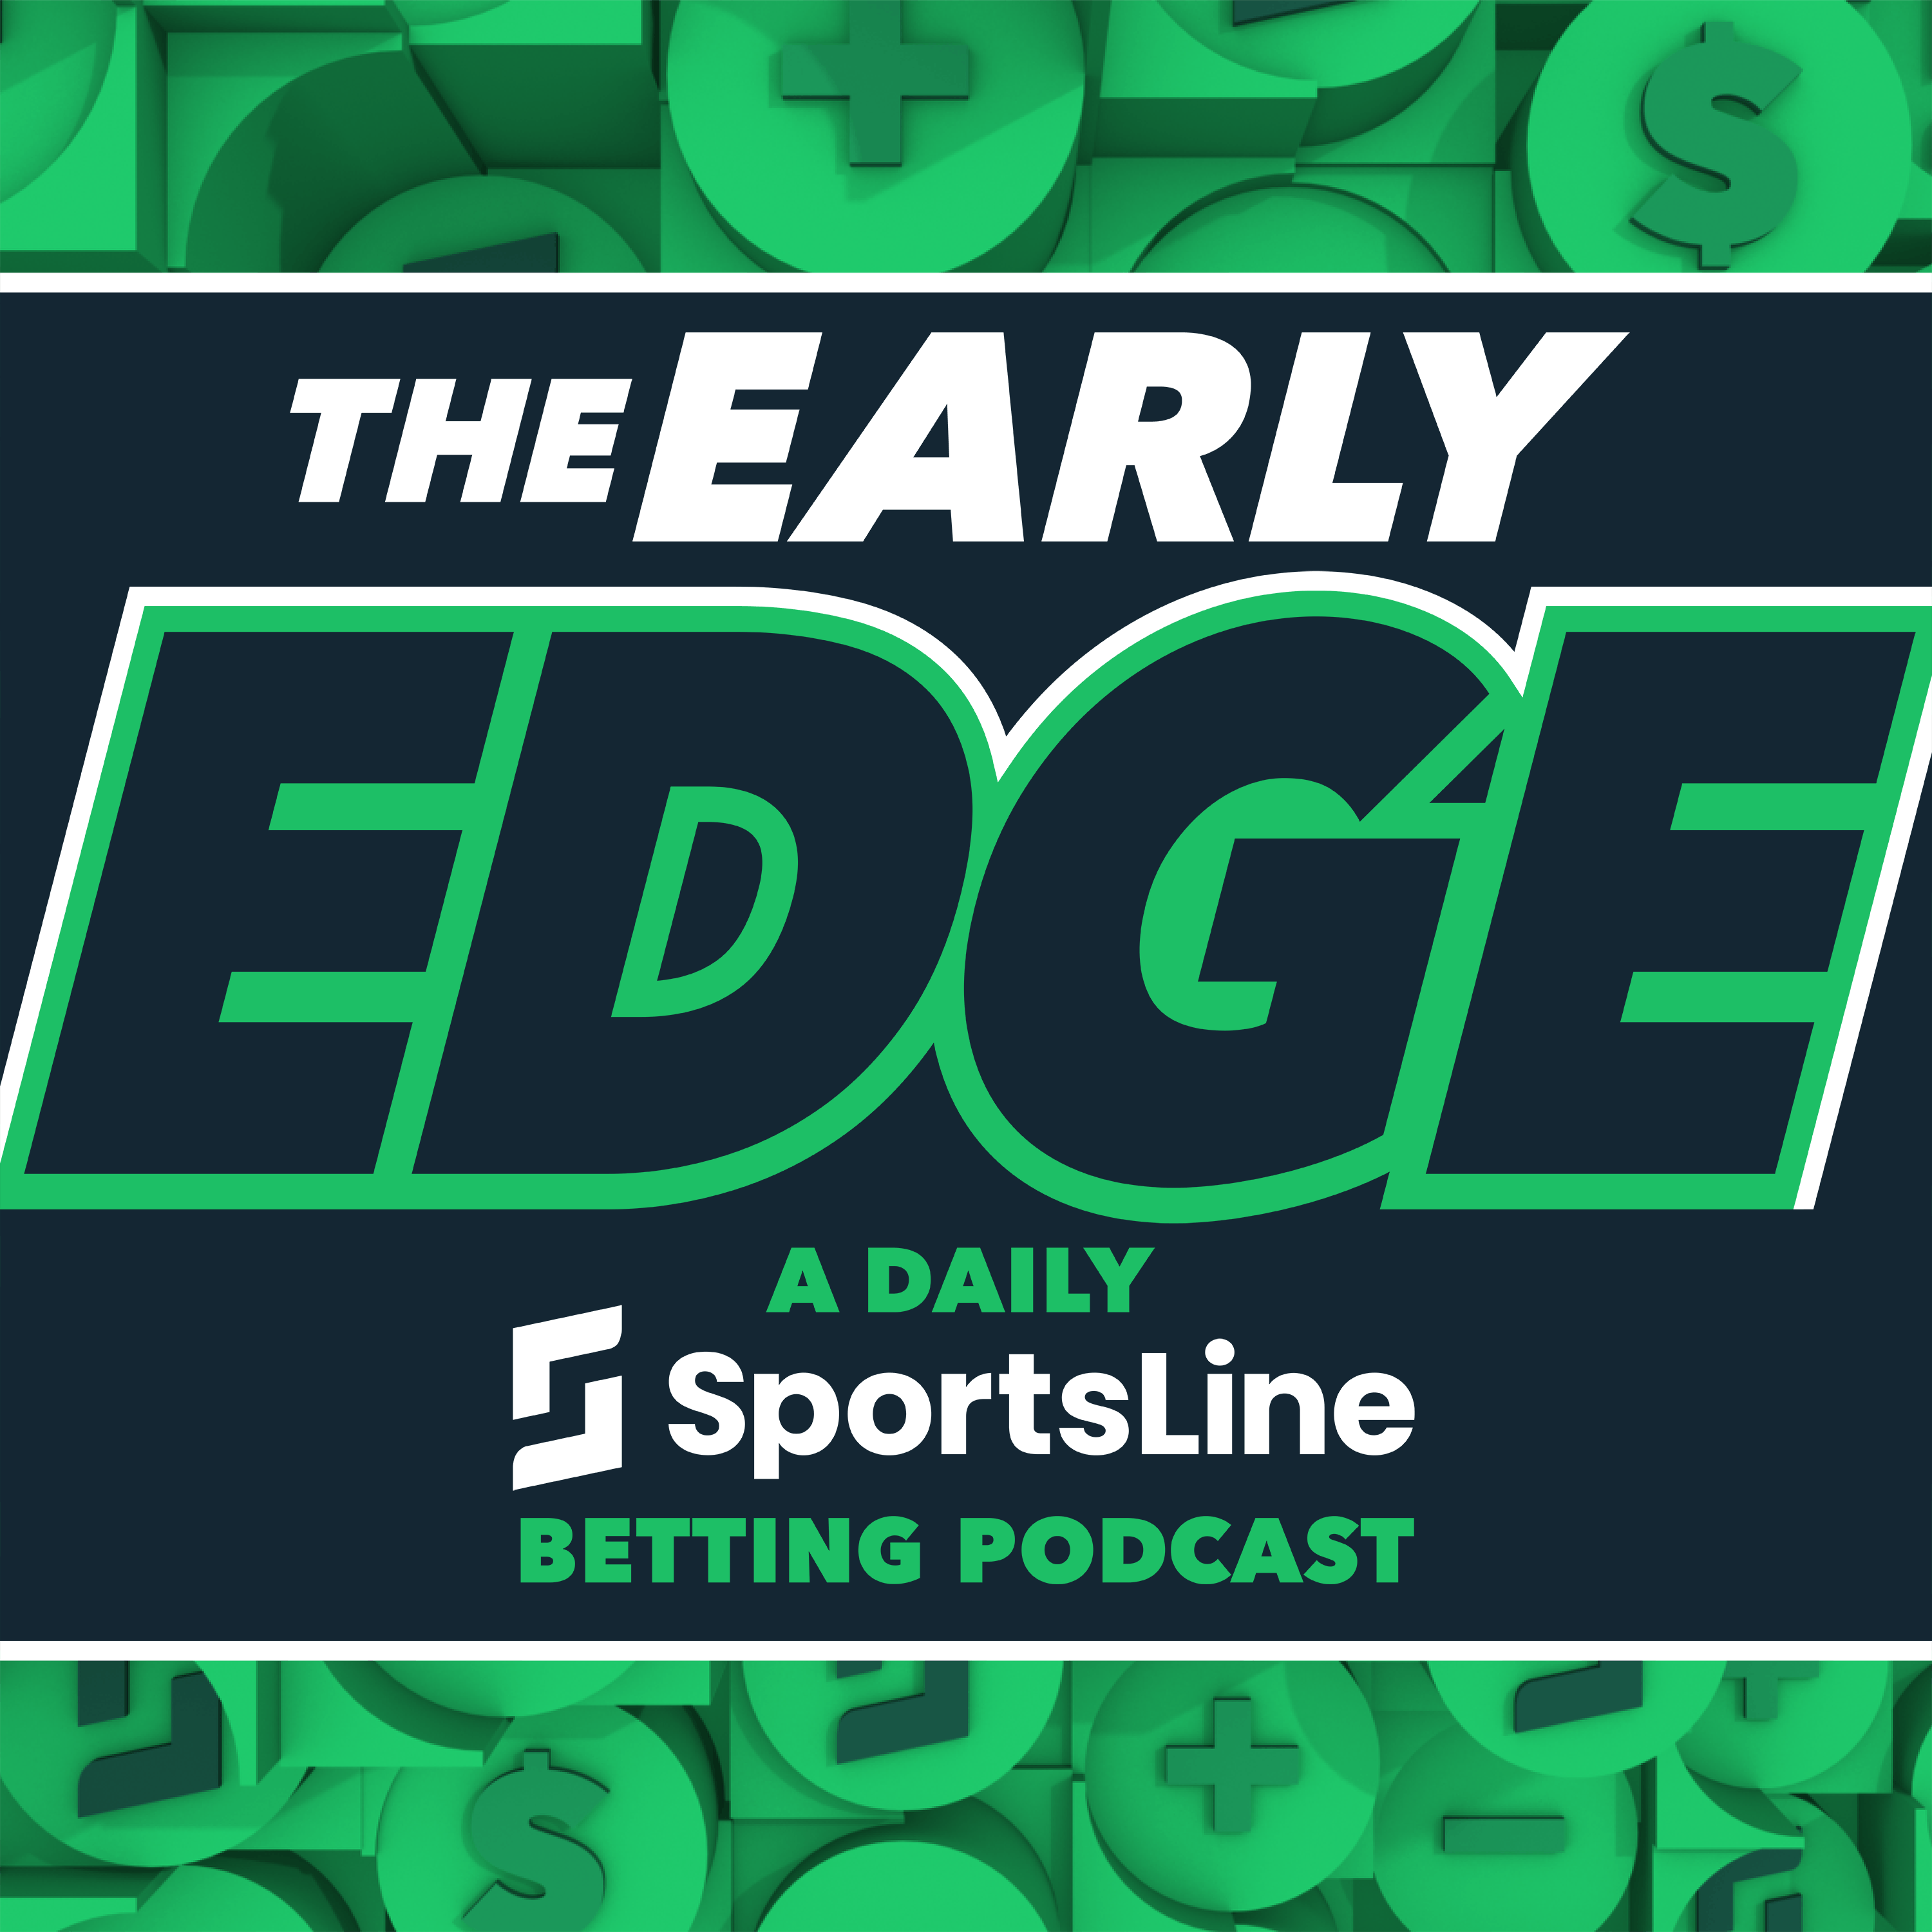 Saturday's BEST BETS: MLB Picks and Props + NBA Playoff Picks | The Early Edge